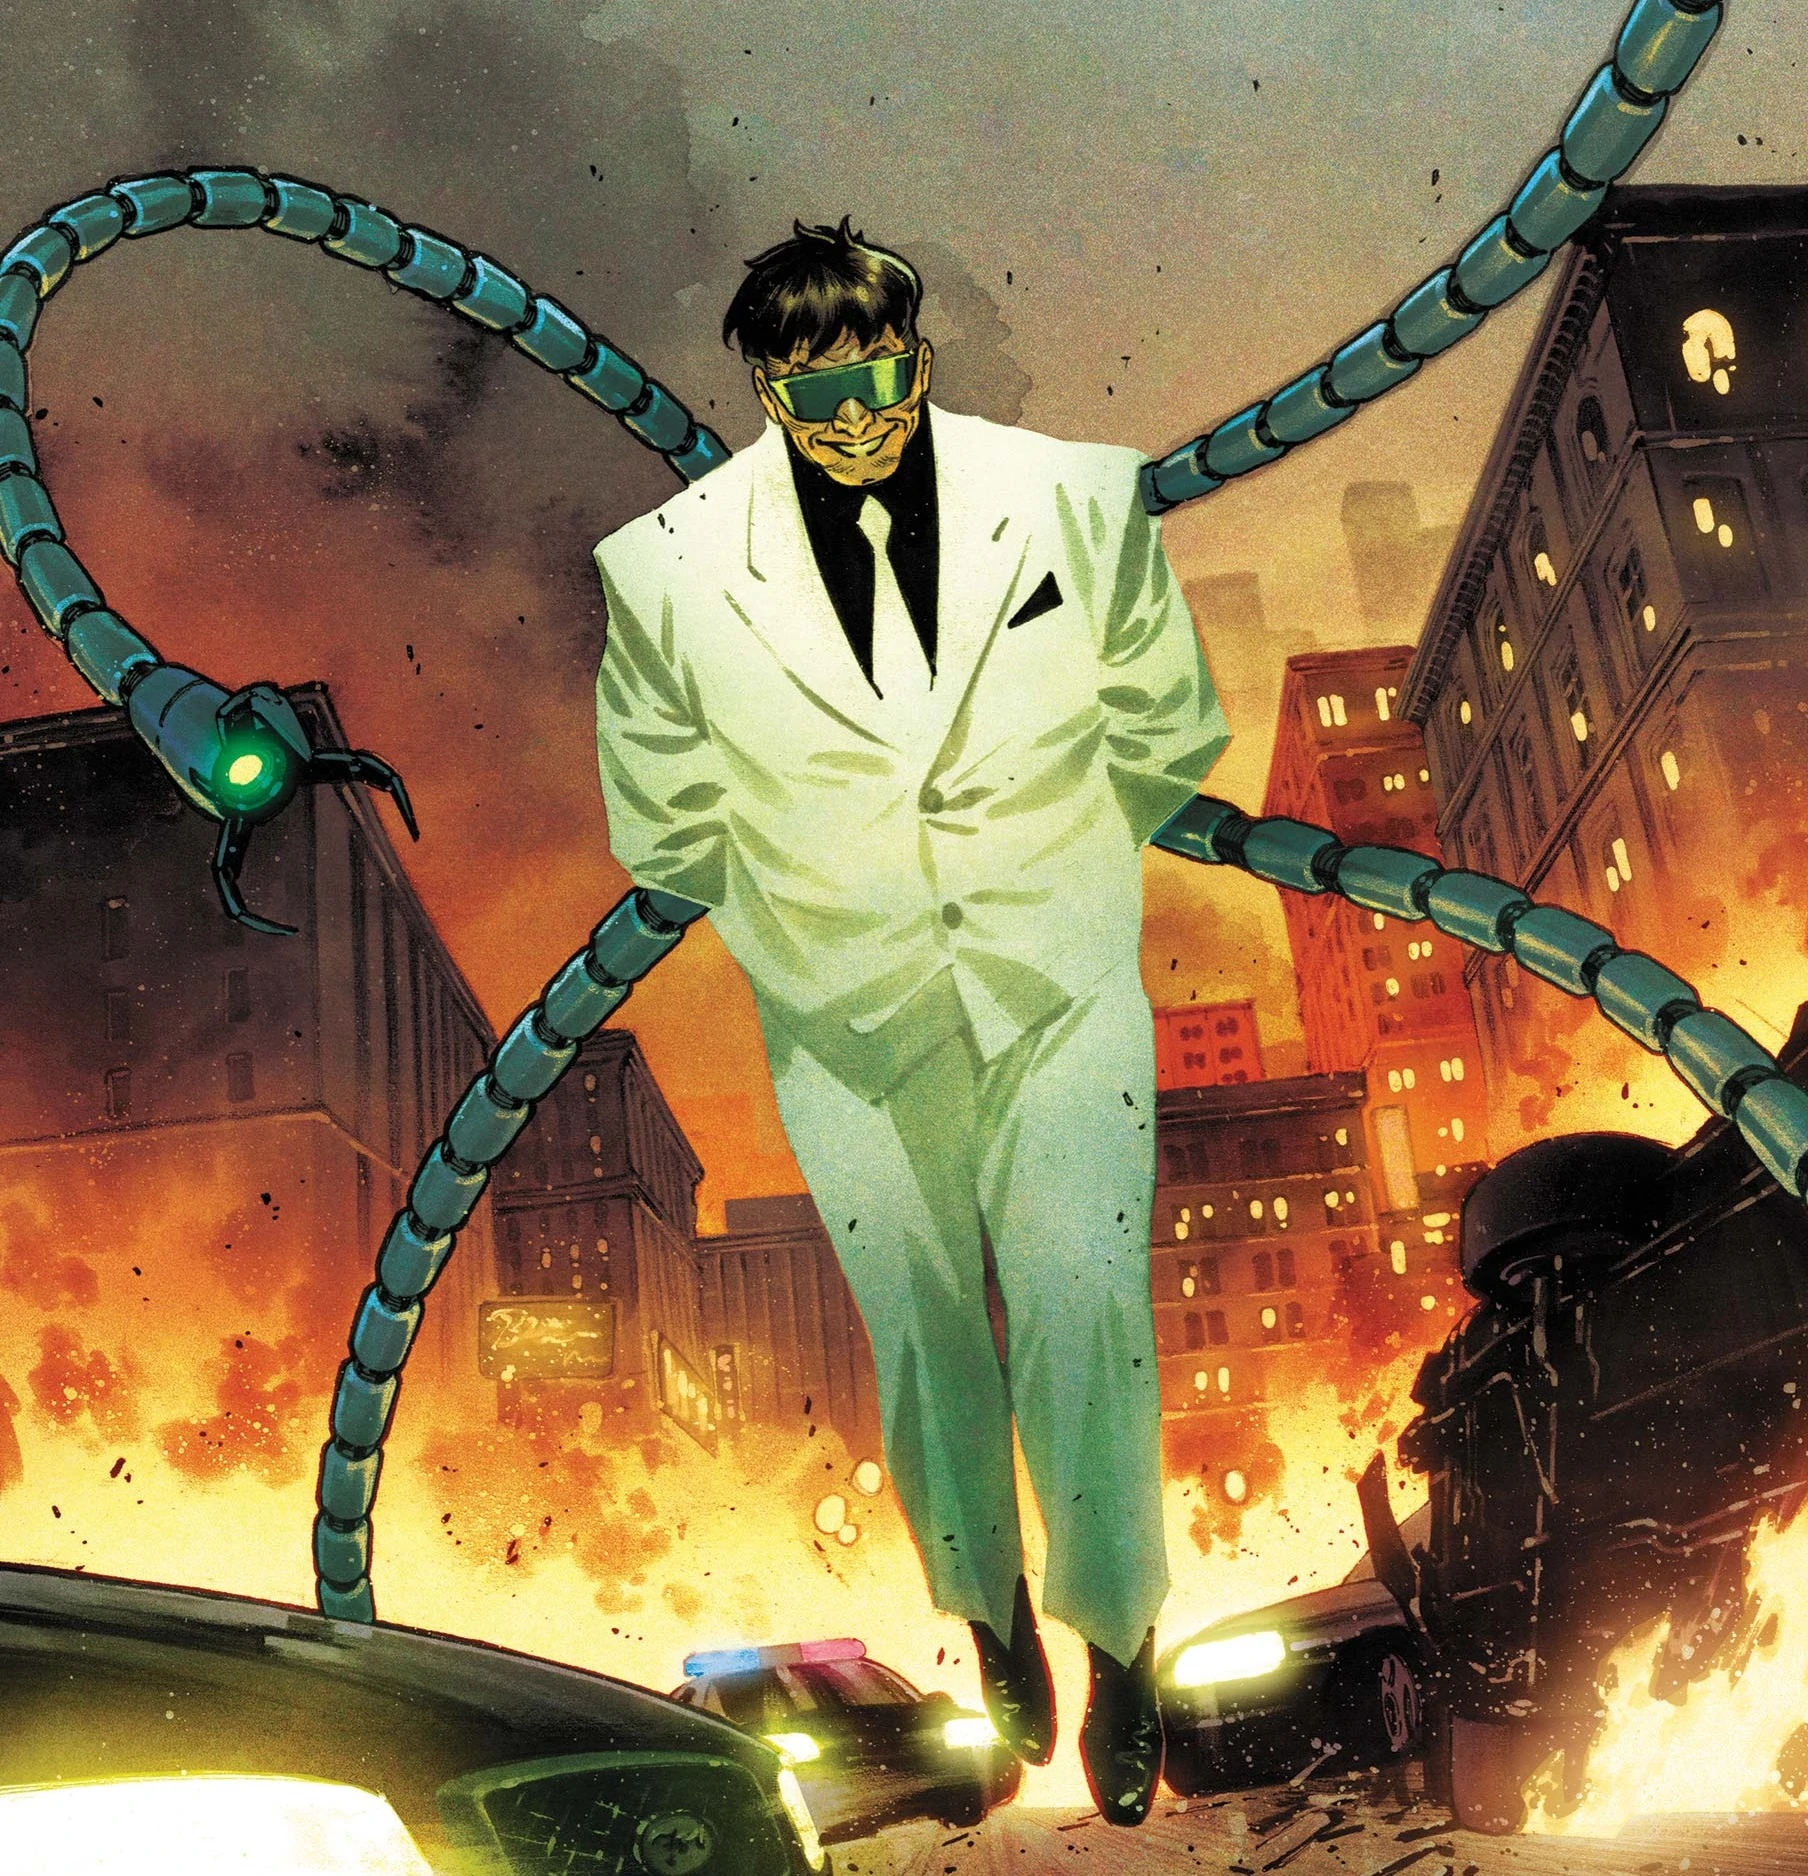 Doctor Octopus, Character Level Wiki